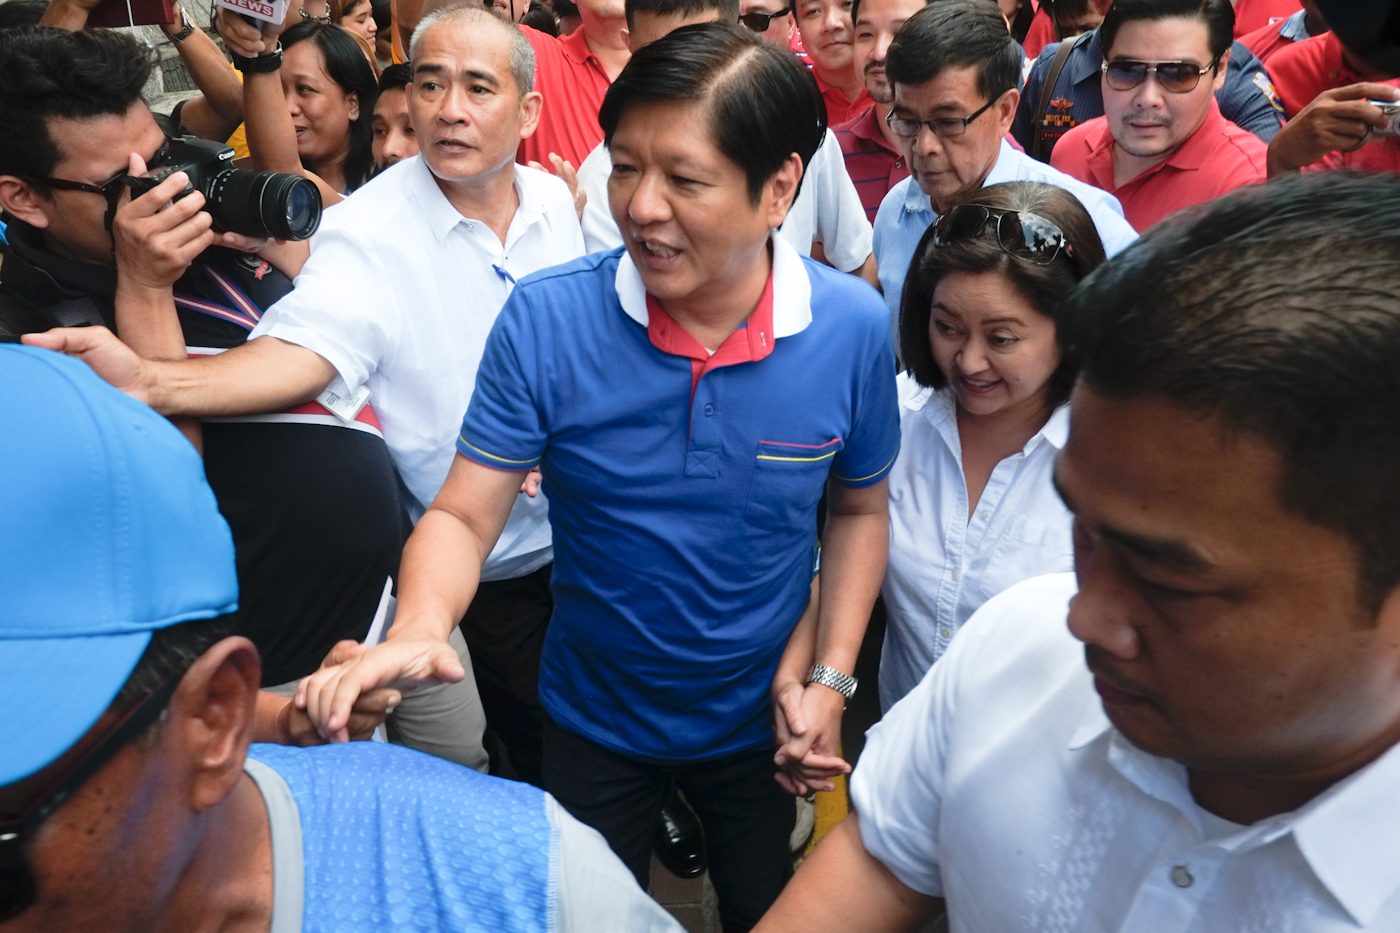 Bongbong Marcos talks about ‘forever’ in Valentine’s video